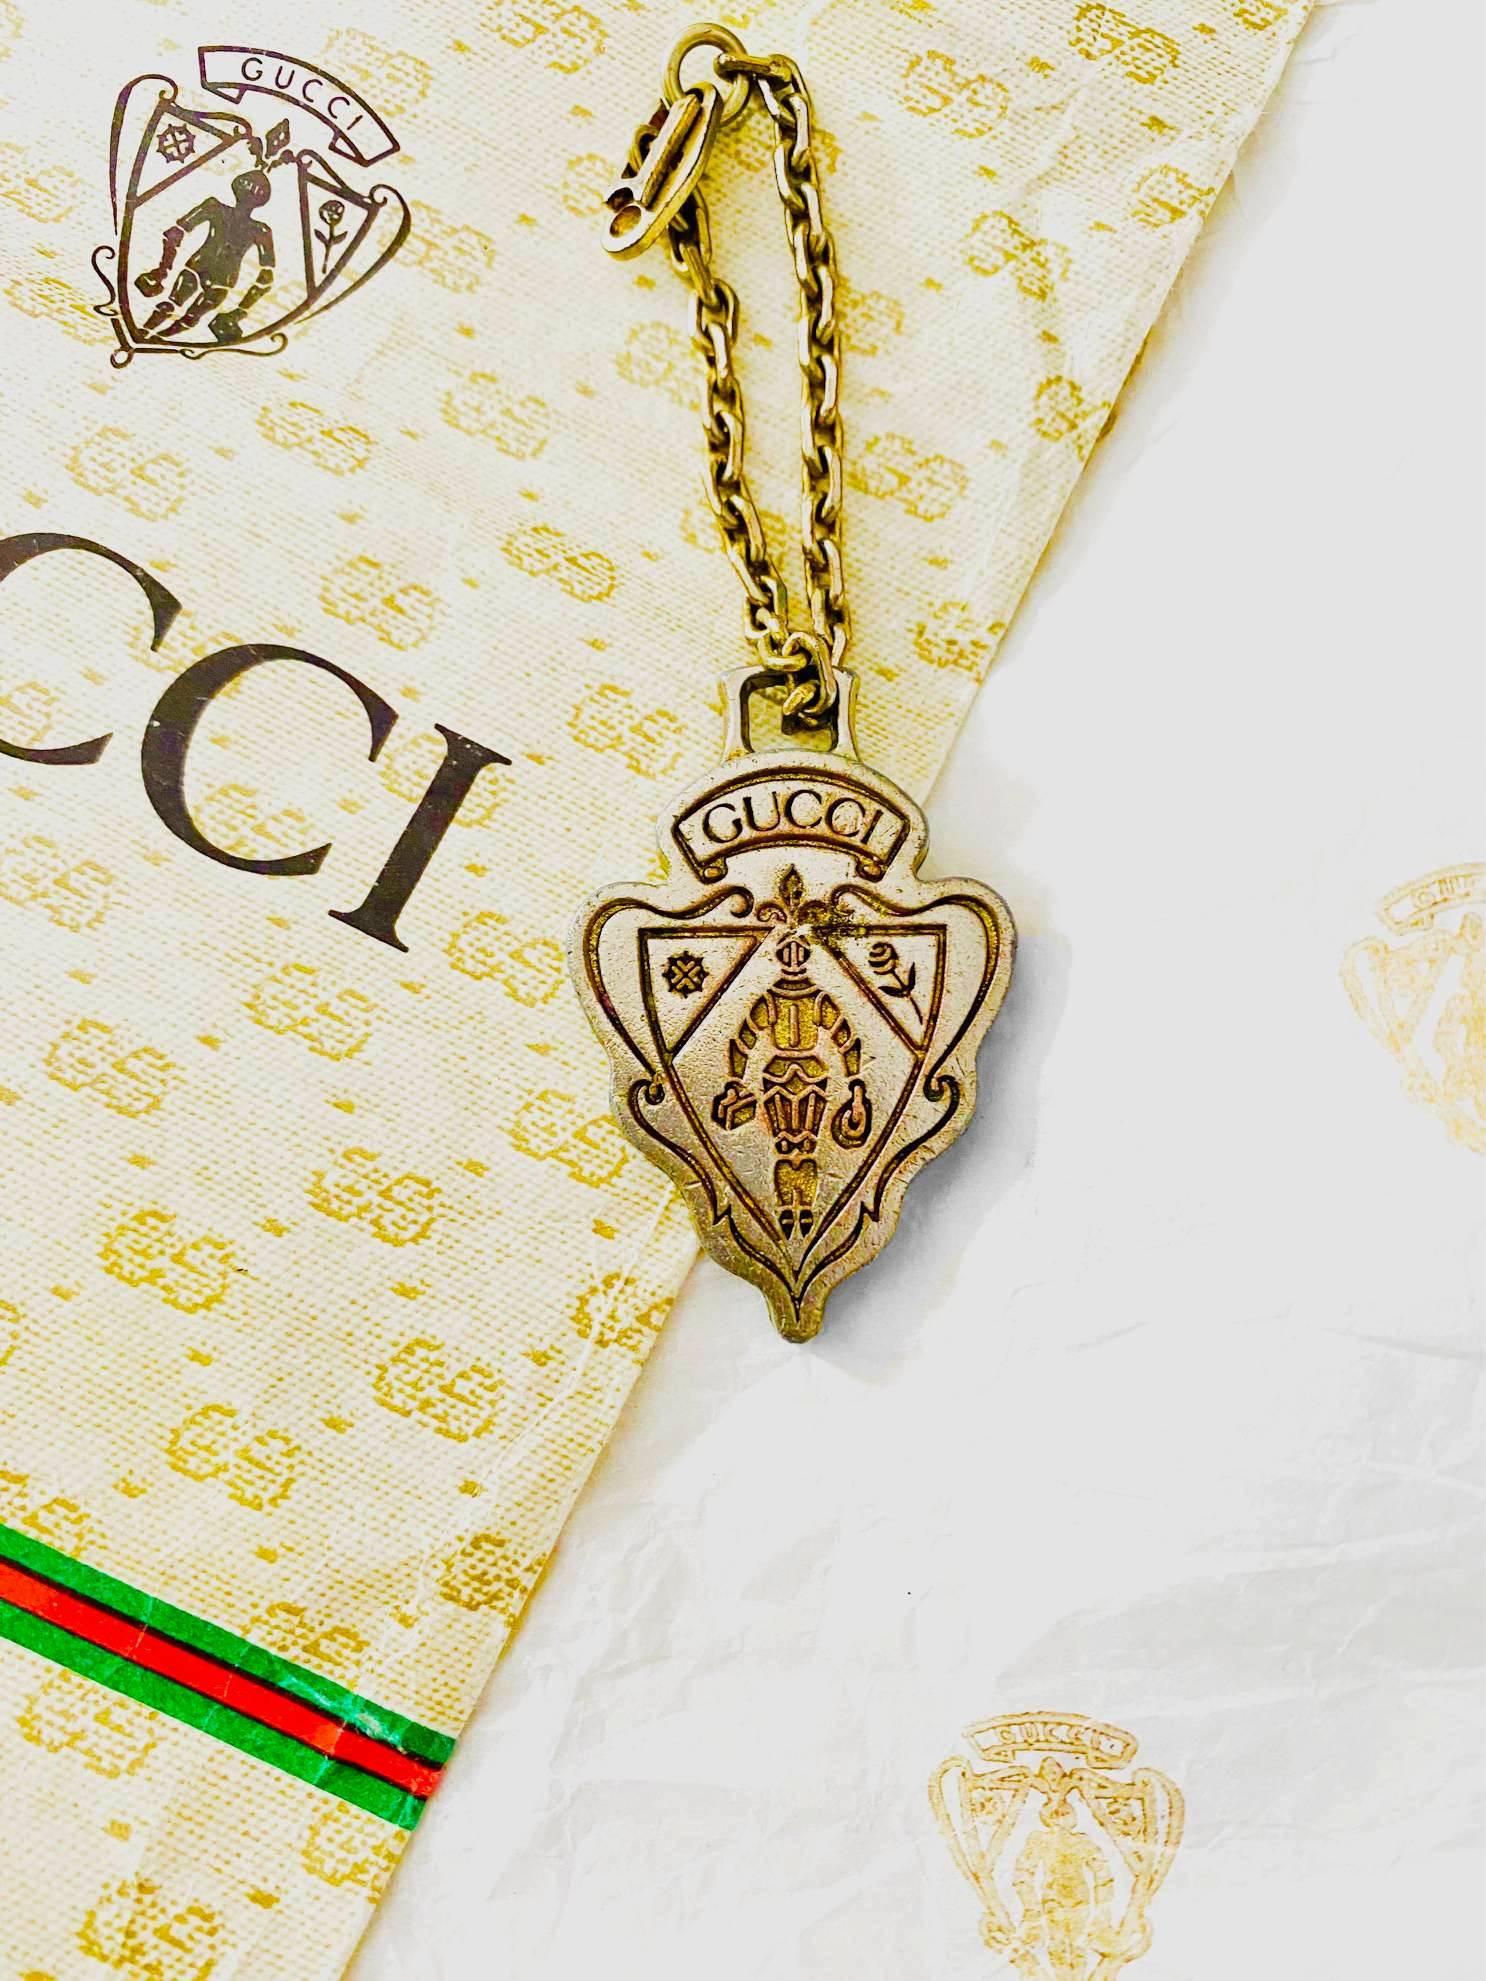 The 1960s Gucci Metal Logo Pendant Keyring brings a timeless elegance to any look. Crafted with high-quality gold-tone brass, it features a classic chain and buckle clutch for lasting durability. The signature Gucci logo emblem adds sophistication.